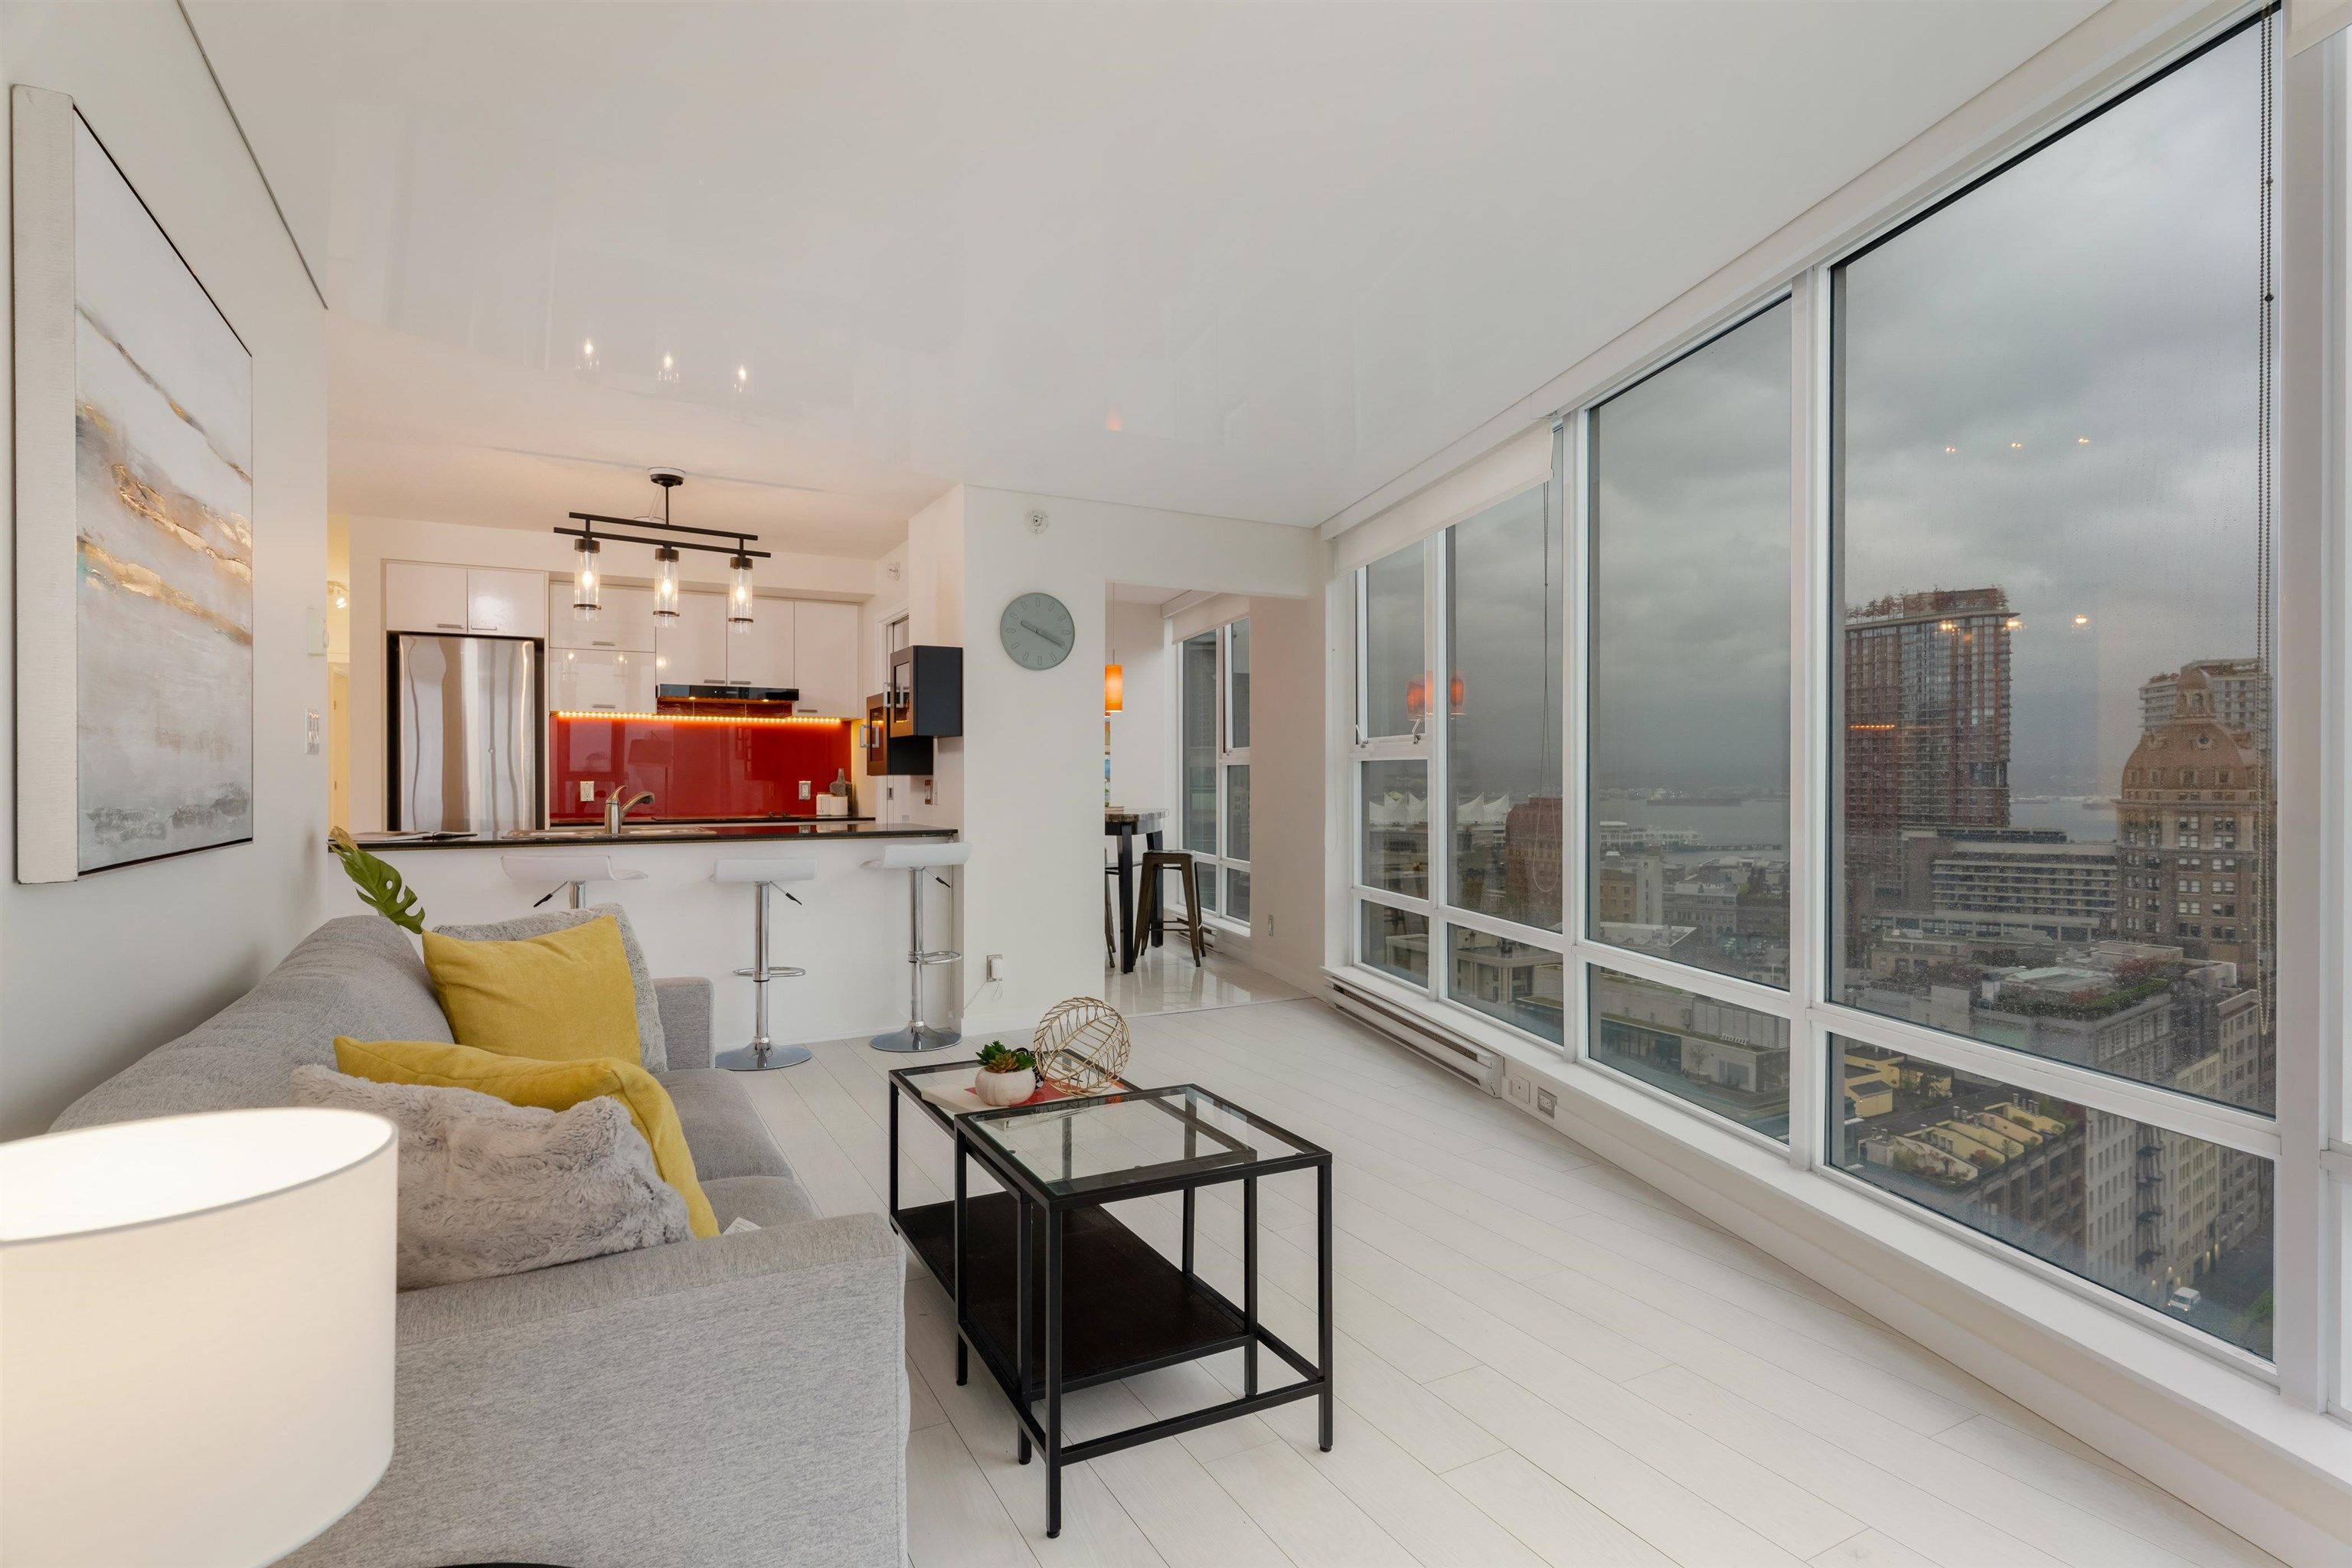 Main Photo: 2208 602 CITADEL PARADE in Vancouver: Downtown VW Condo for sale (Vancouver West)  : MLS®# R2627188